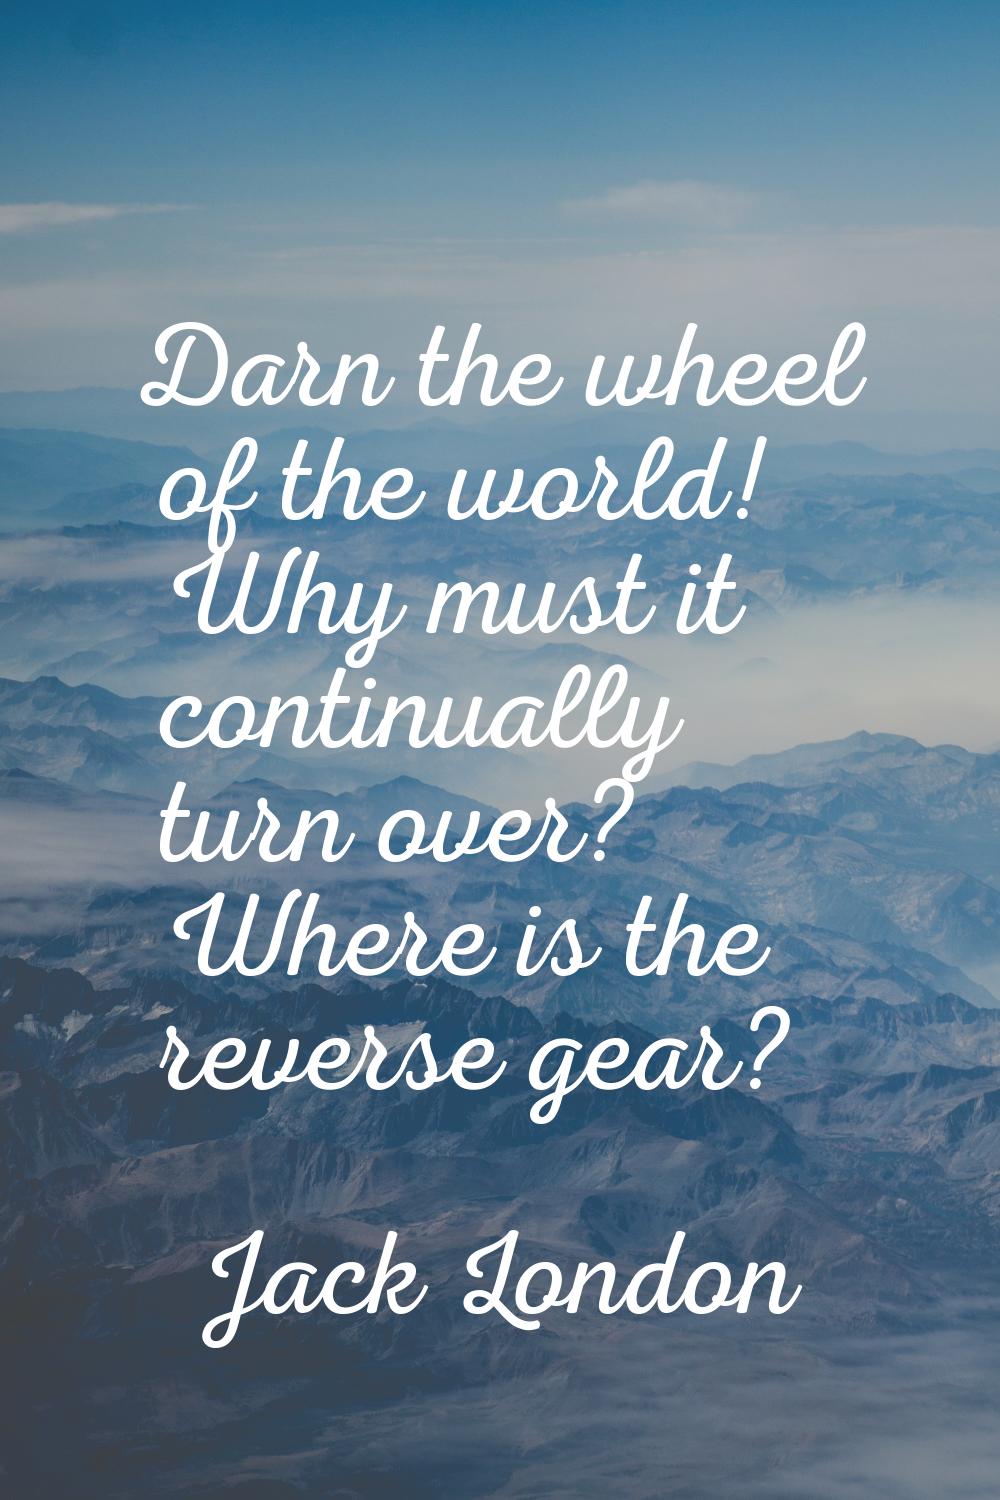 Darn the wheel of the world! Why must it continually turn over? Where is the reverse gear?